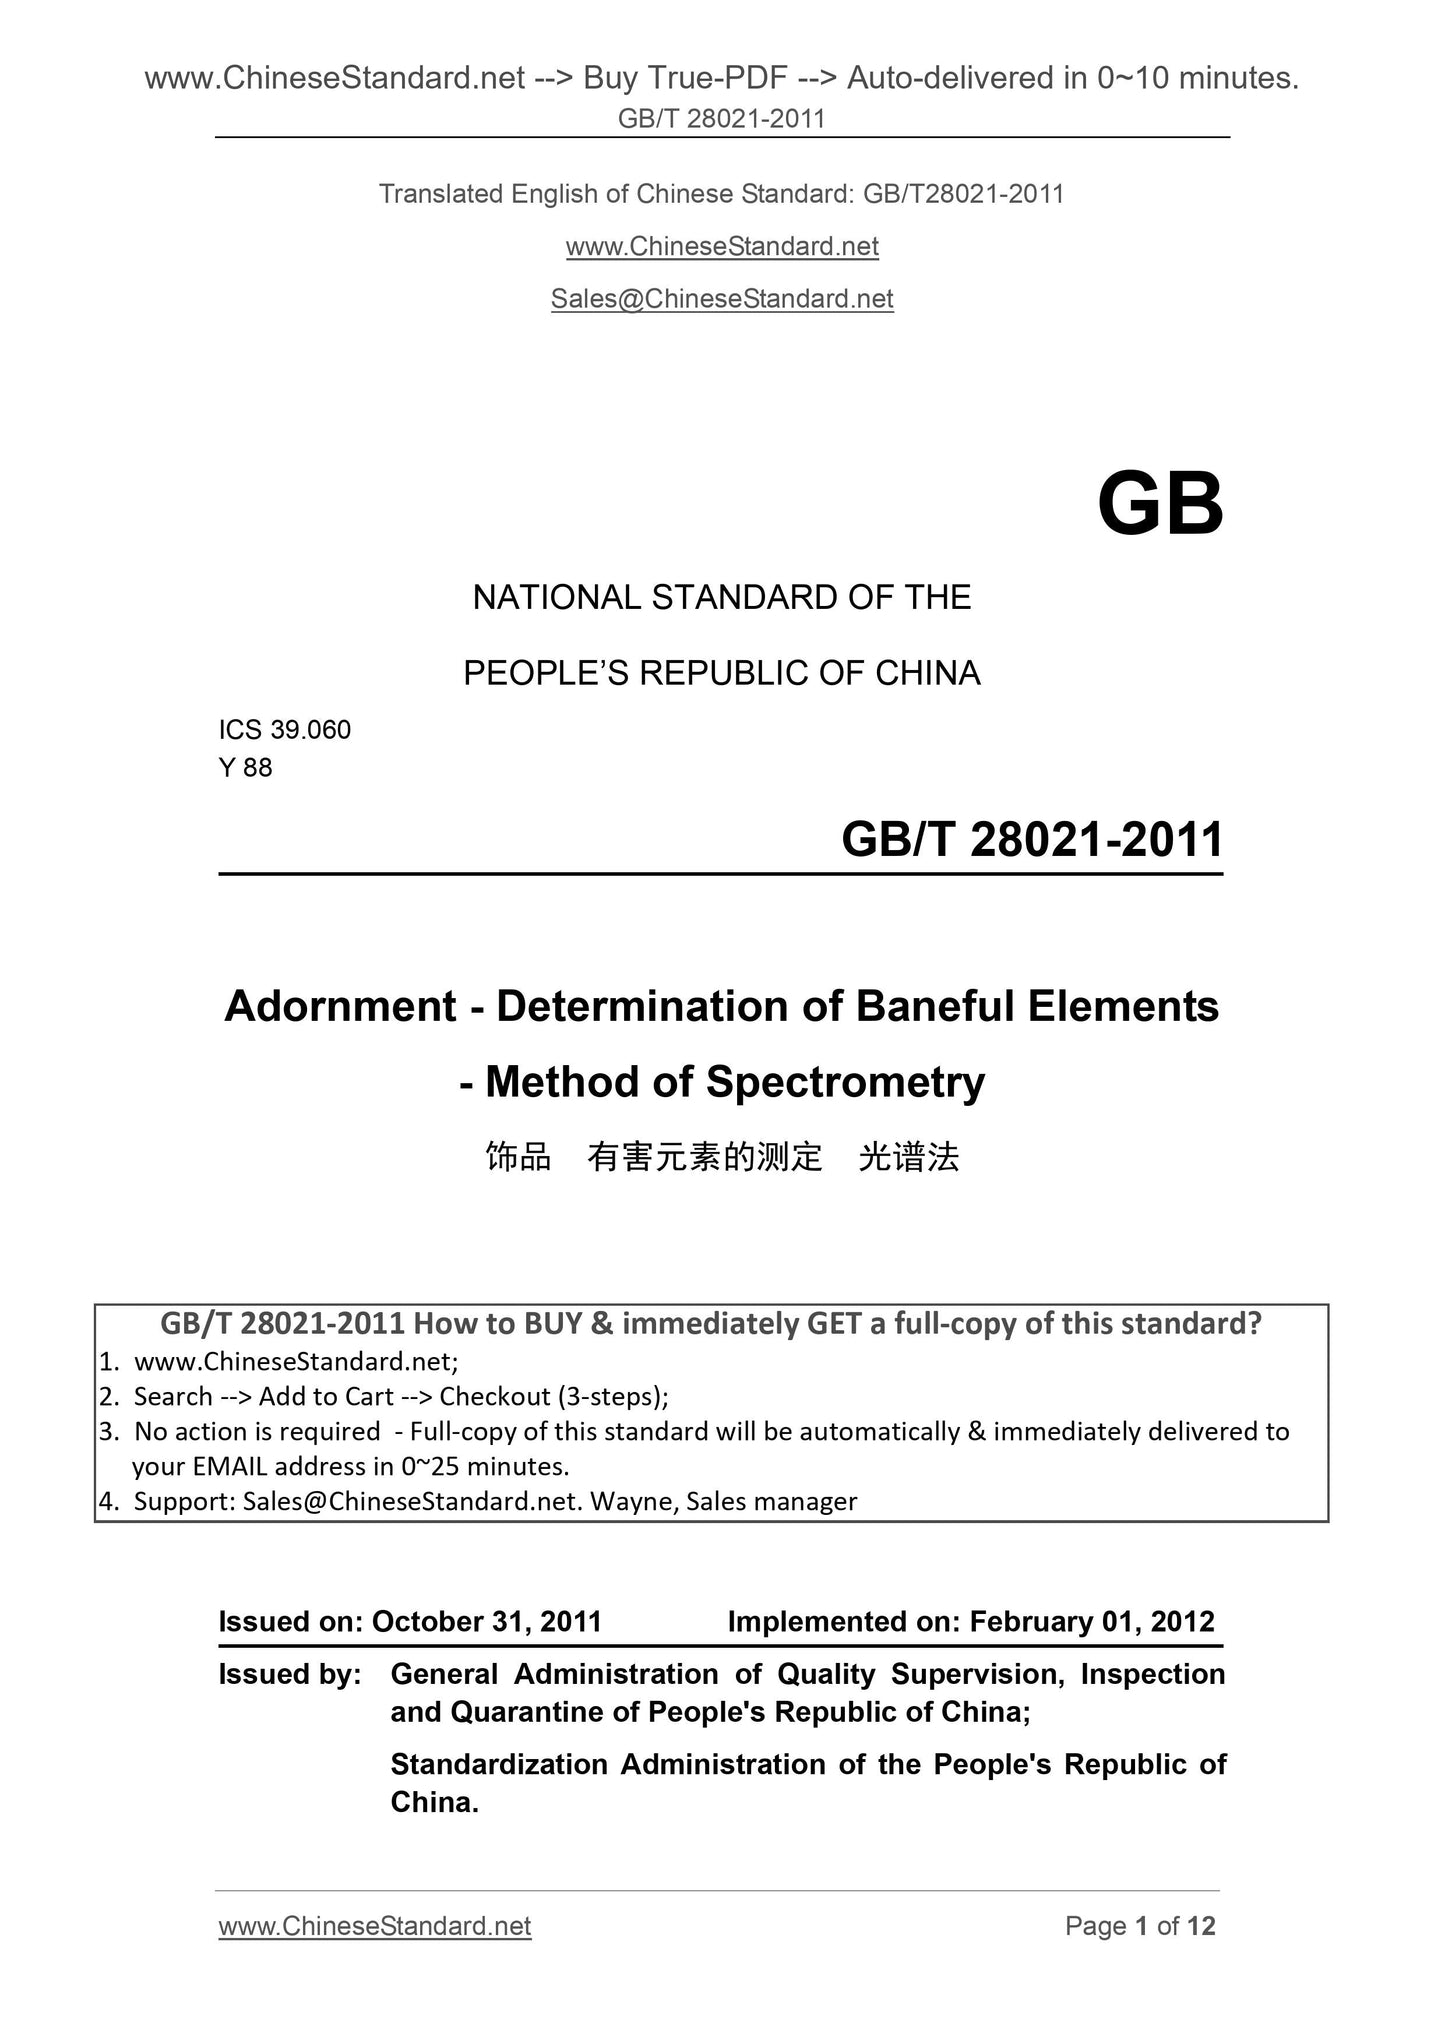 GB/T 28021-2011 Page 1